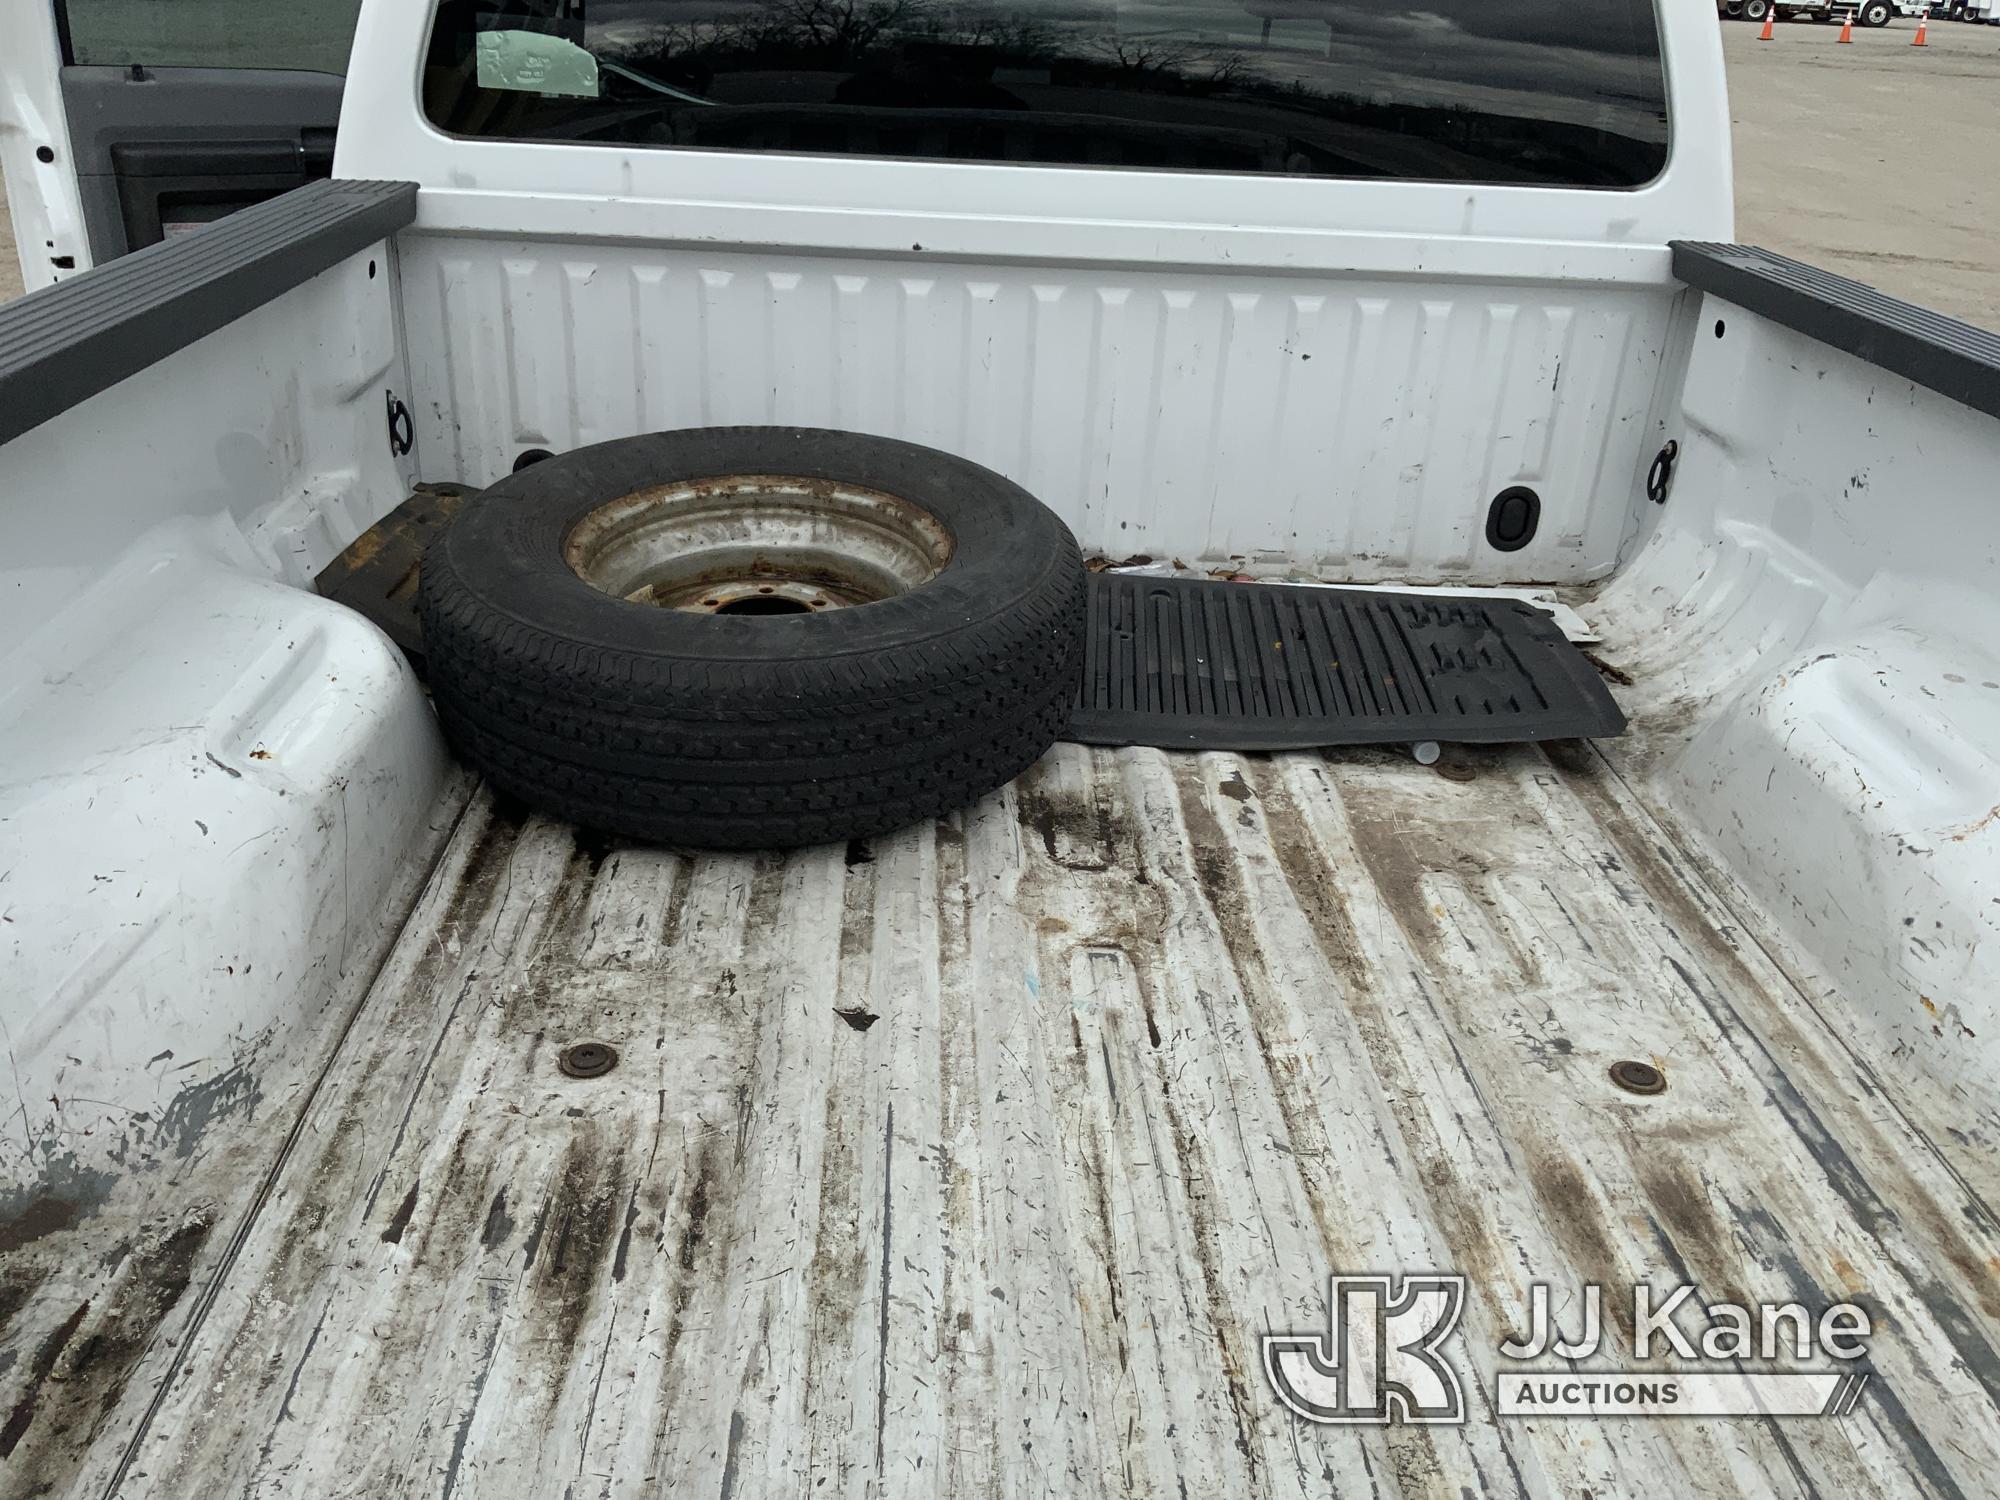 (Fort Wayne, IN) 2015 Ford F250 Extended-Cab Pickup Truck Not Running, Condition Unknown, No Crank